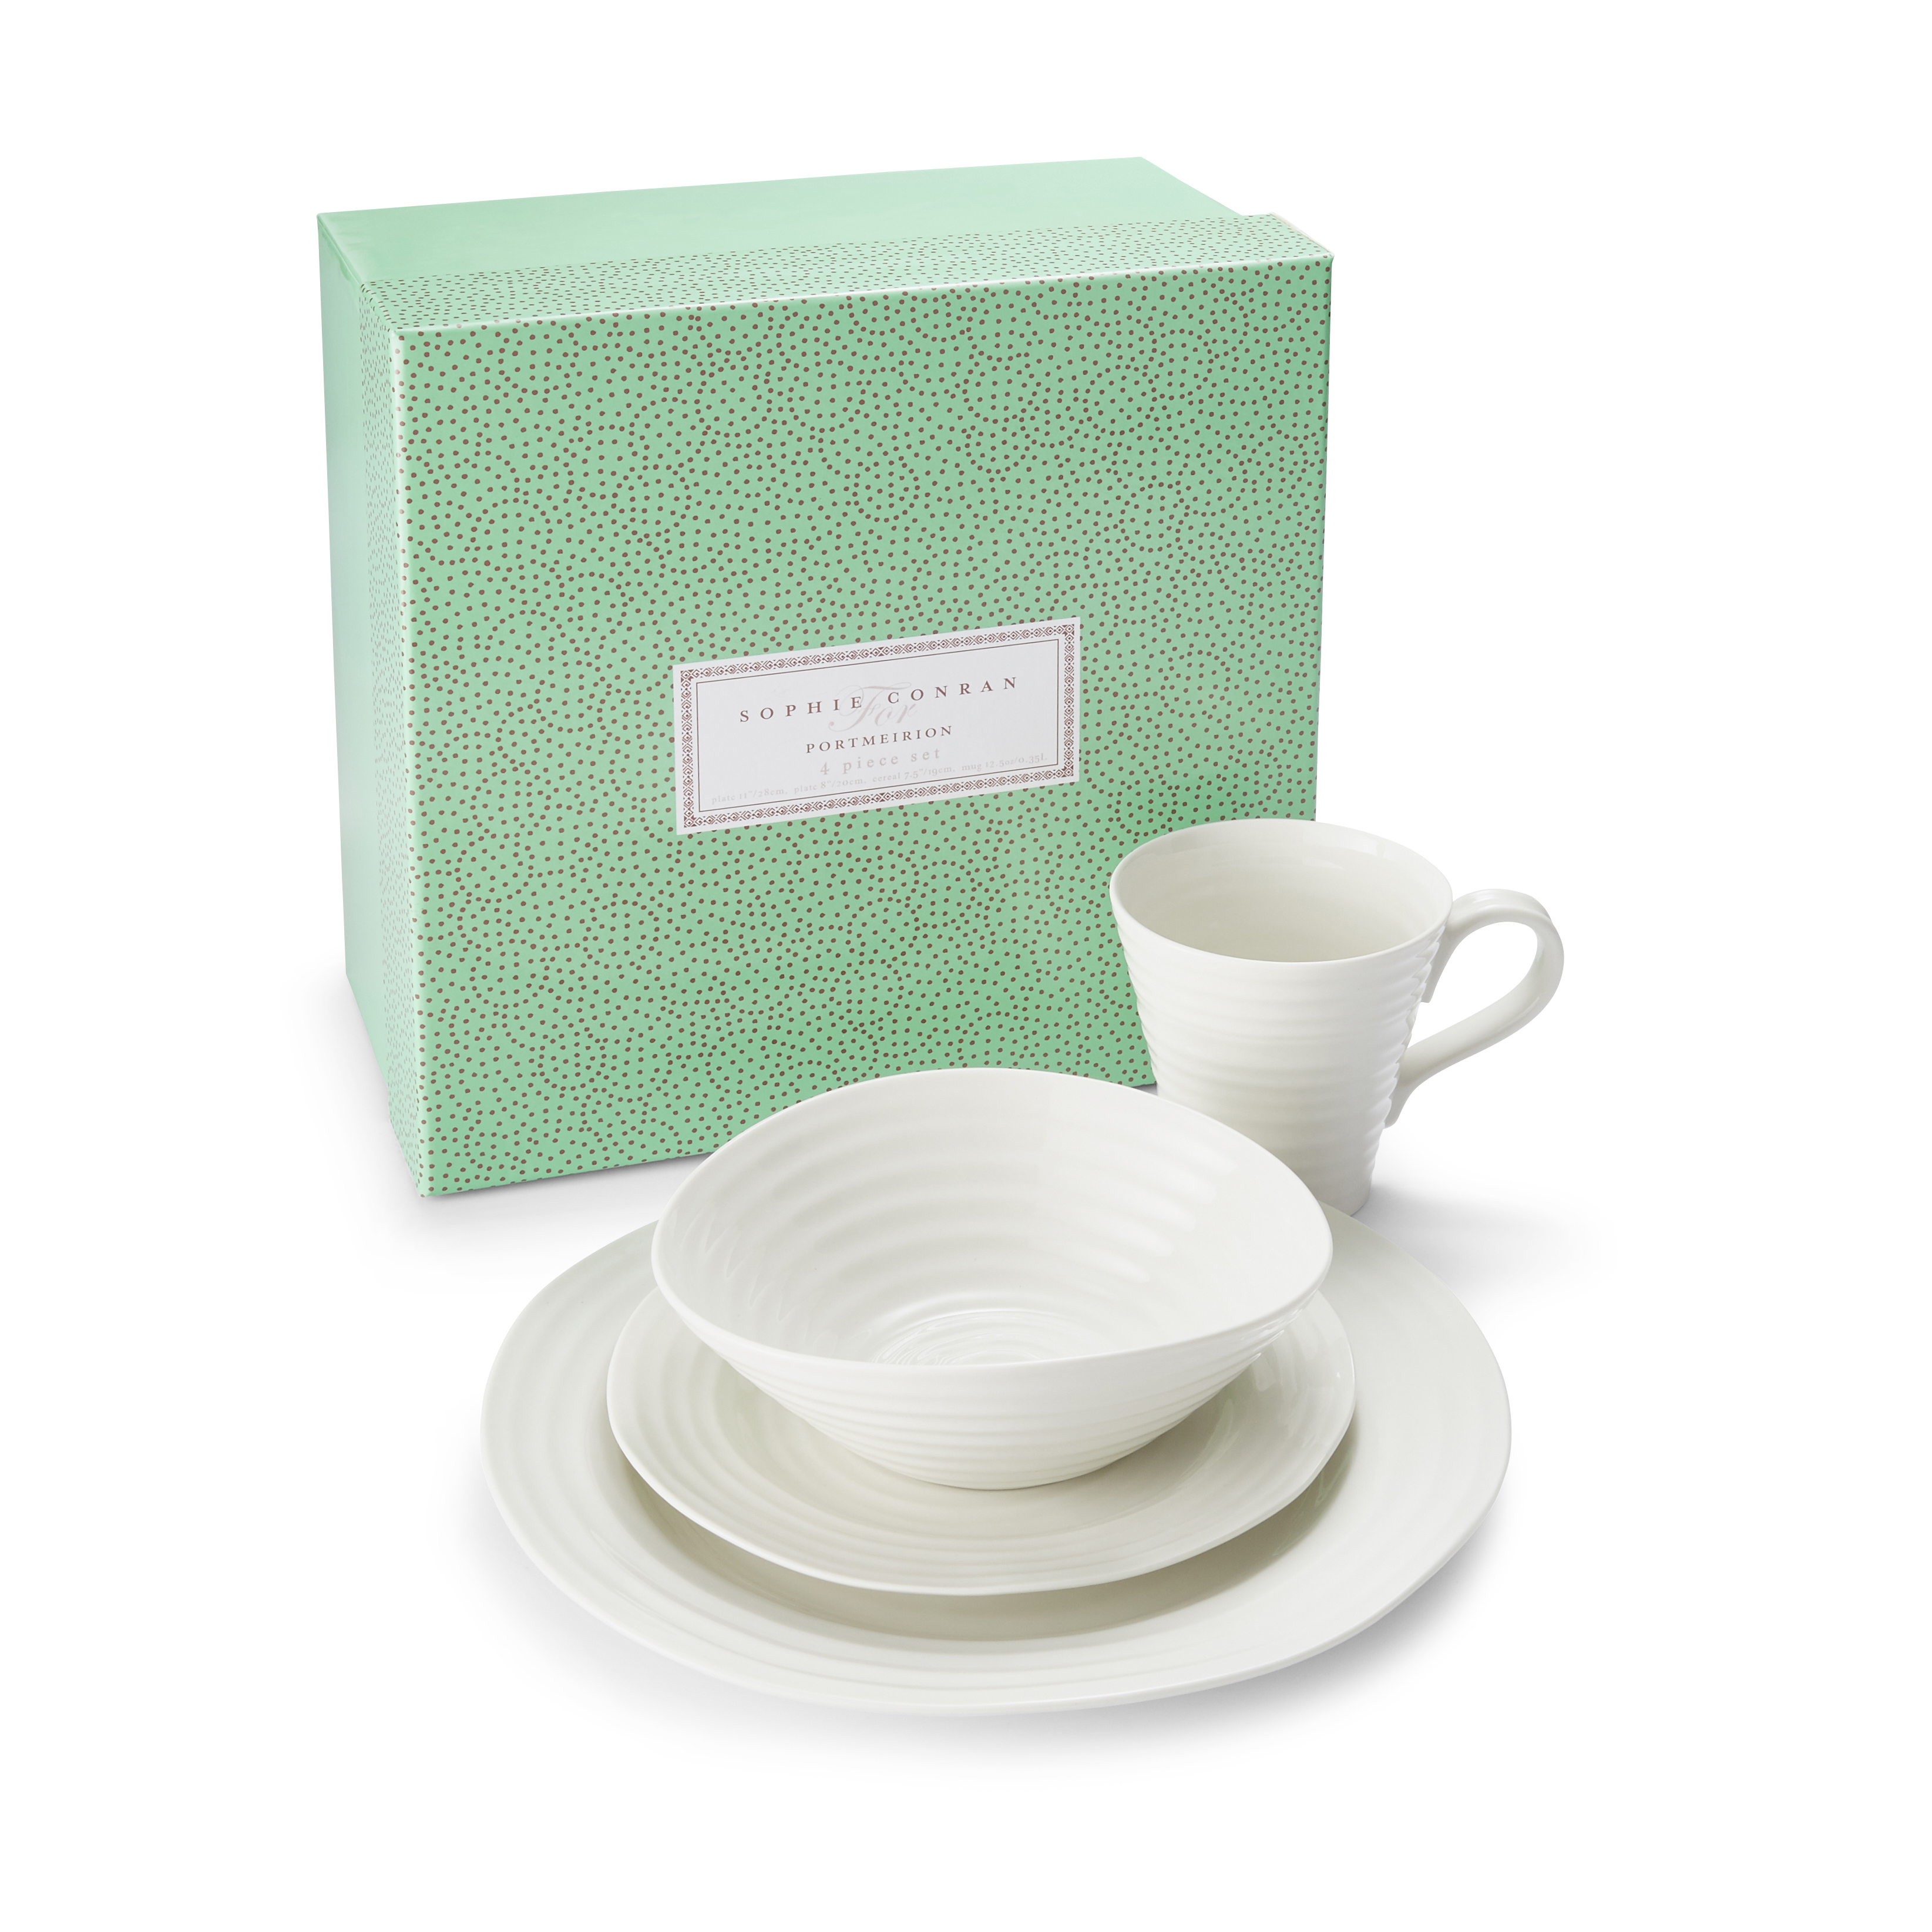 Portmeirion Sophie Conran White 4 Piece Place Setting image number null